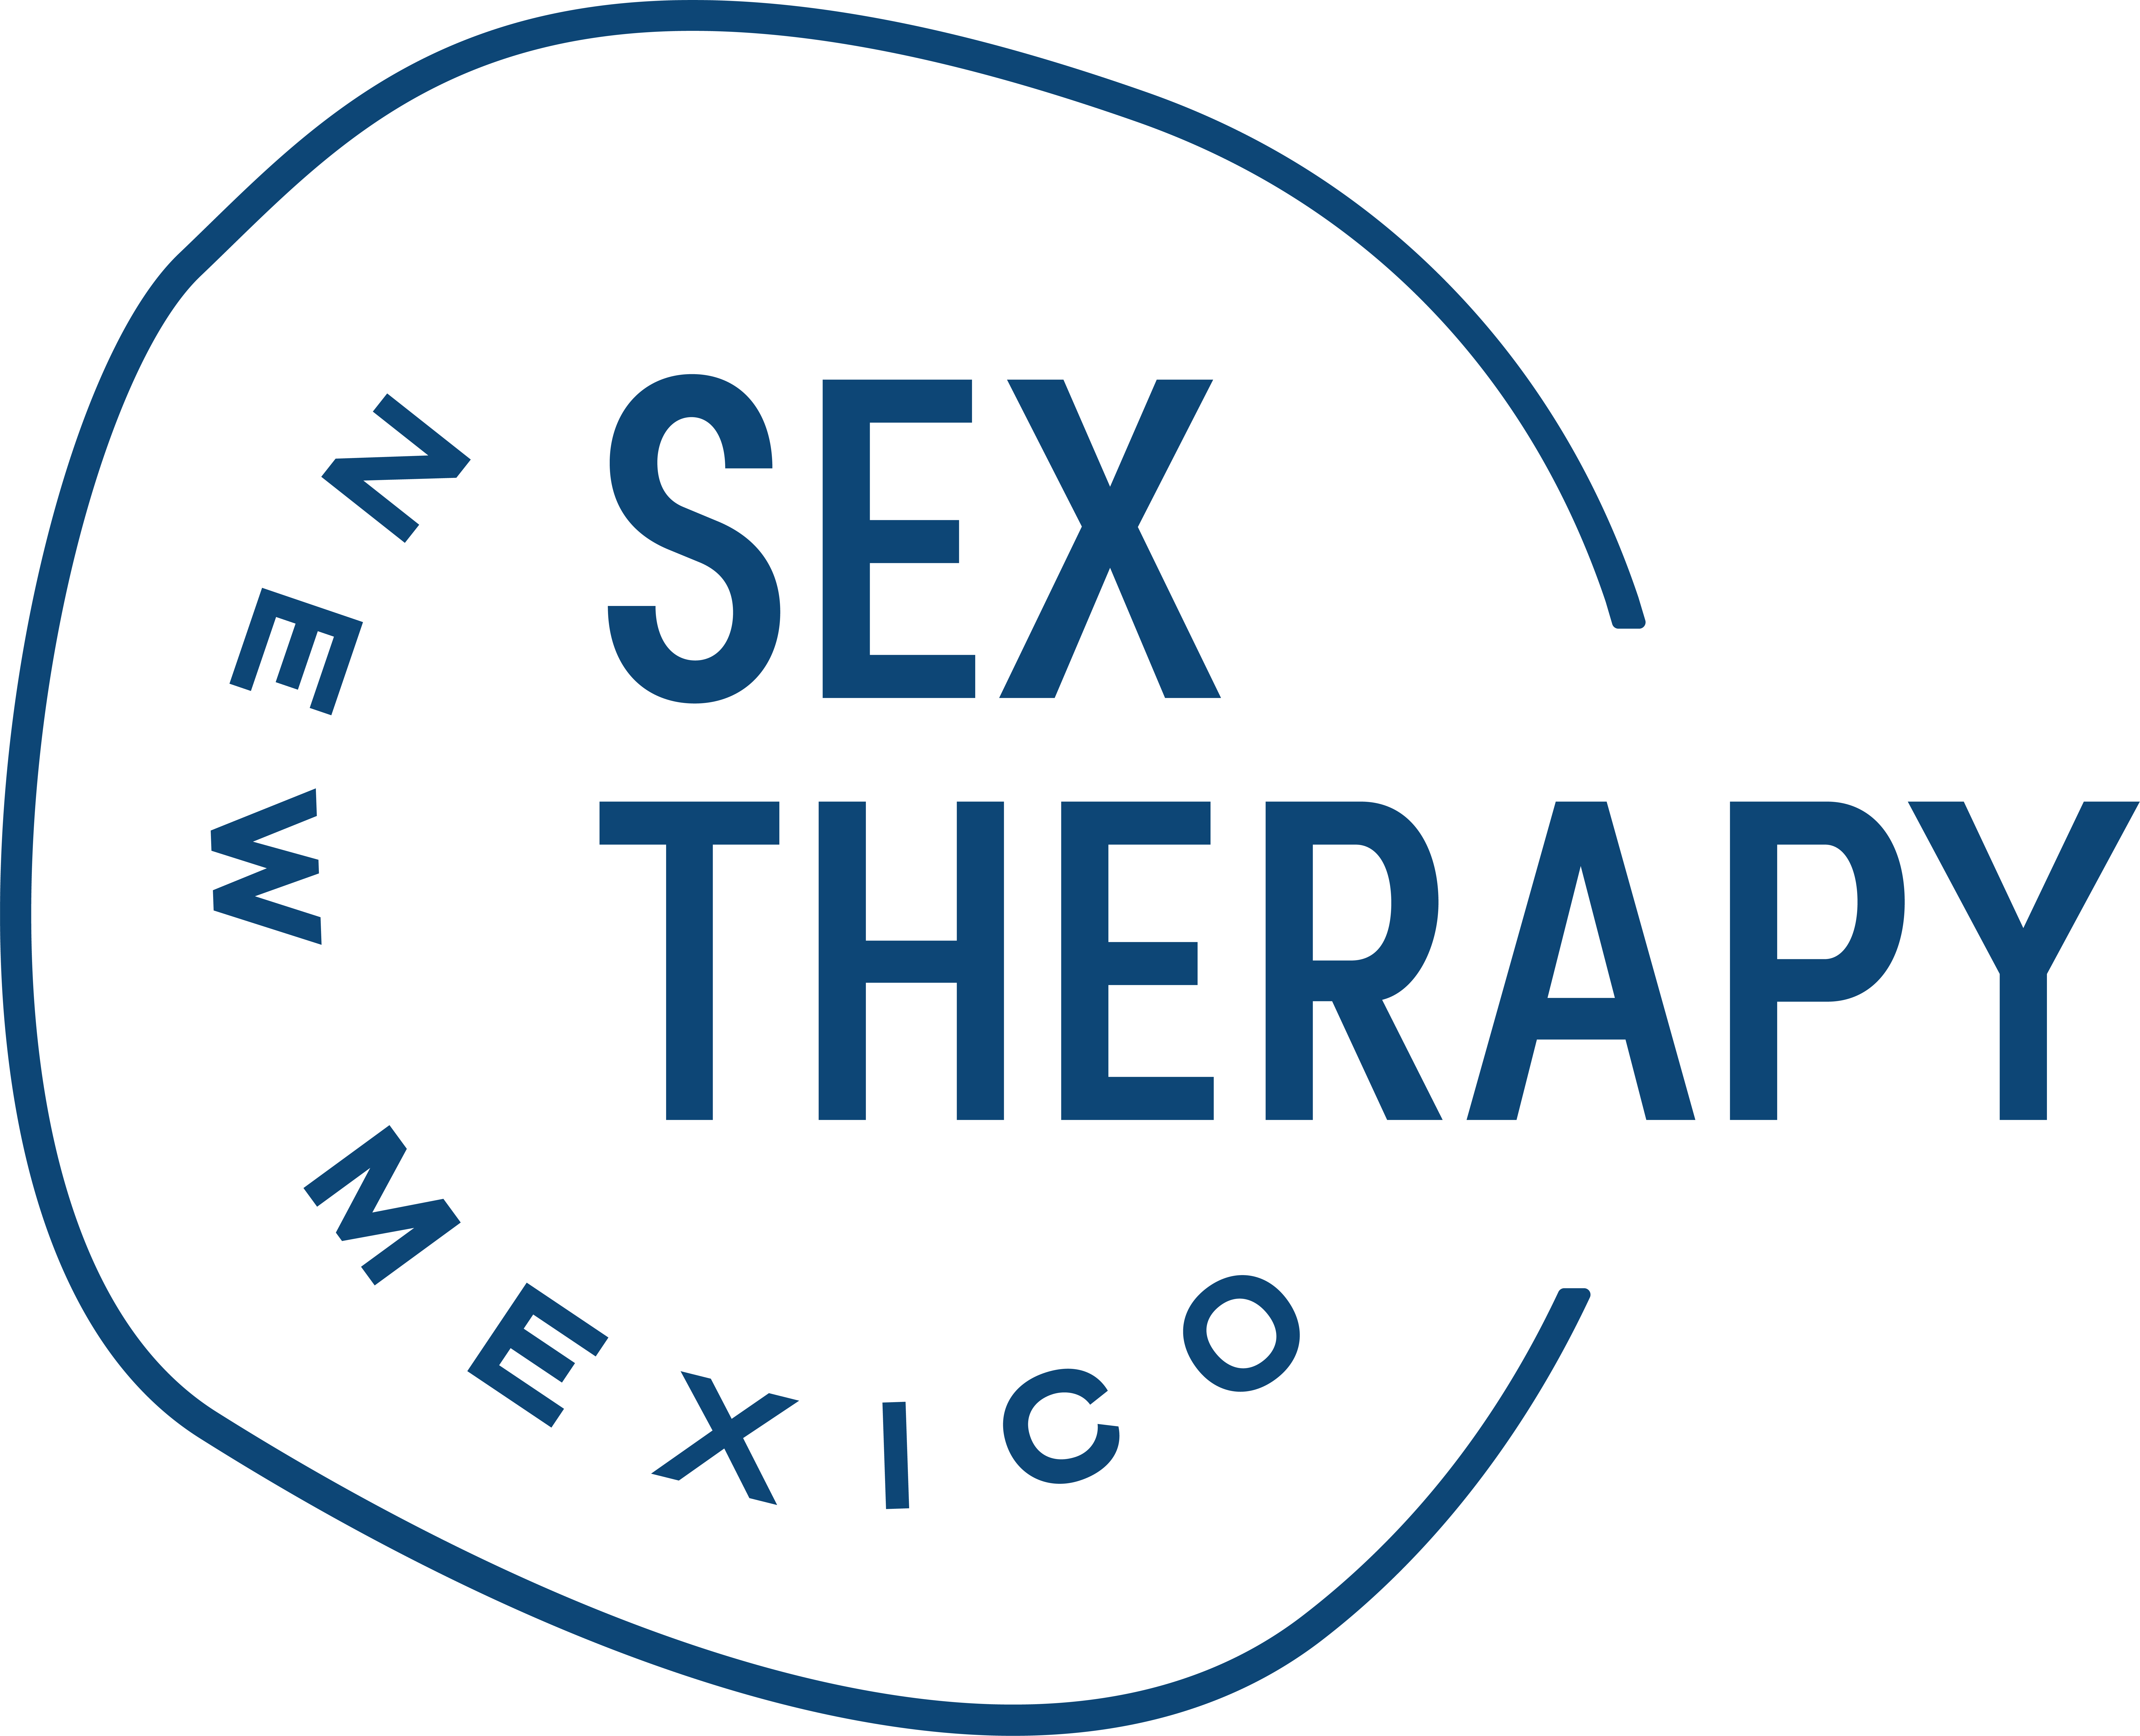 https://www.sextherapynm.com/wp-content/uploads/2020/12/STNM_logo_primary-blue.png